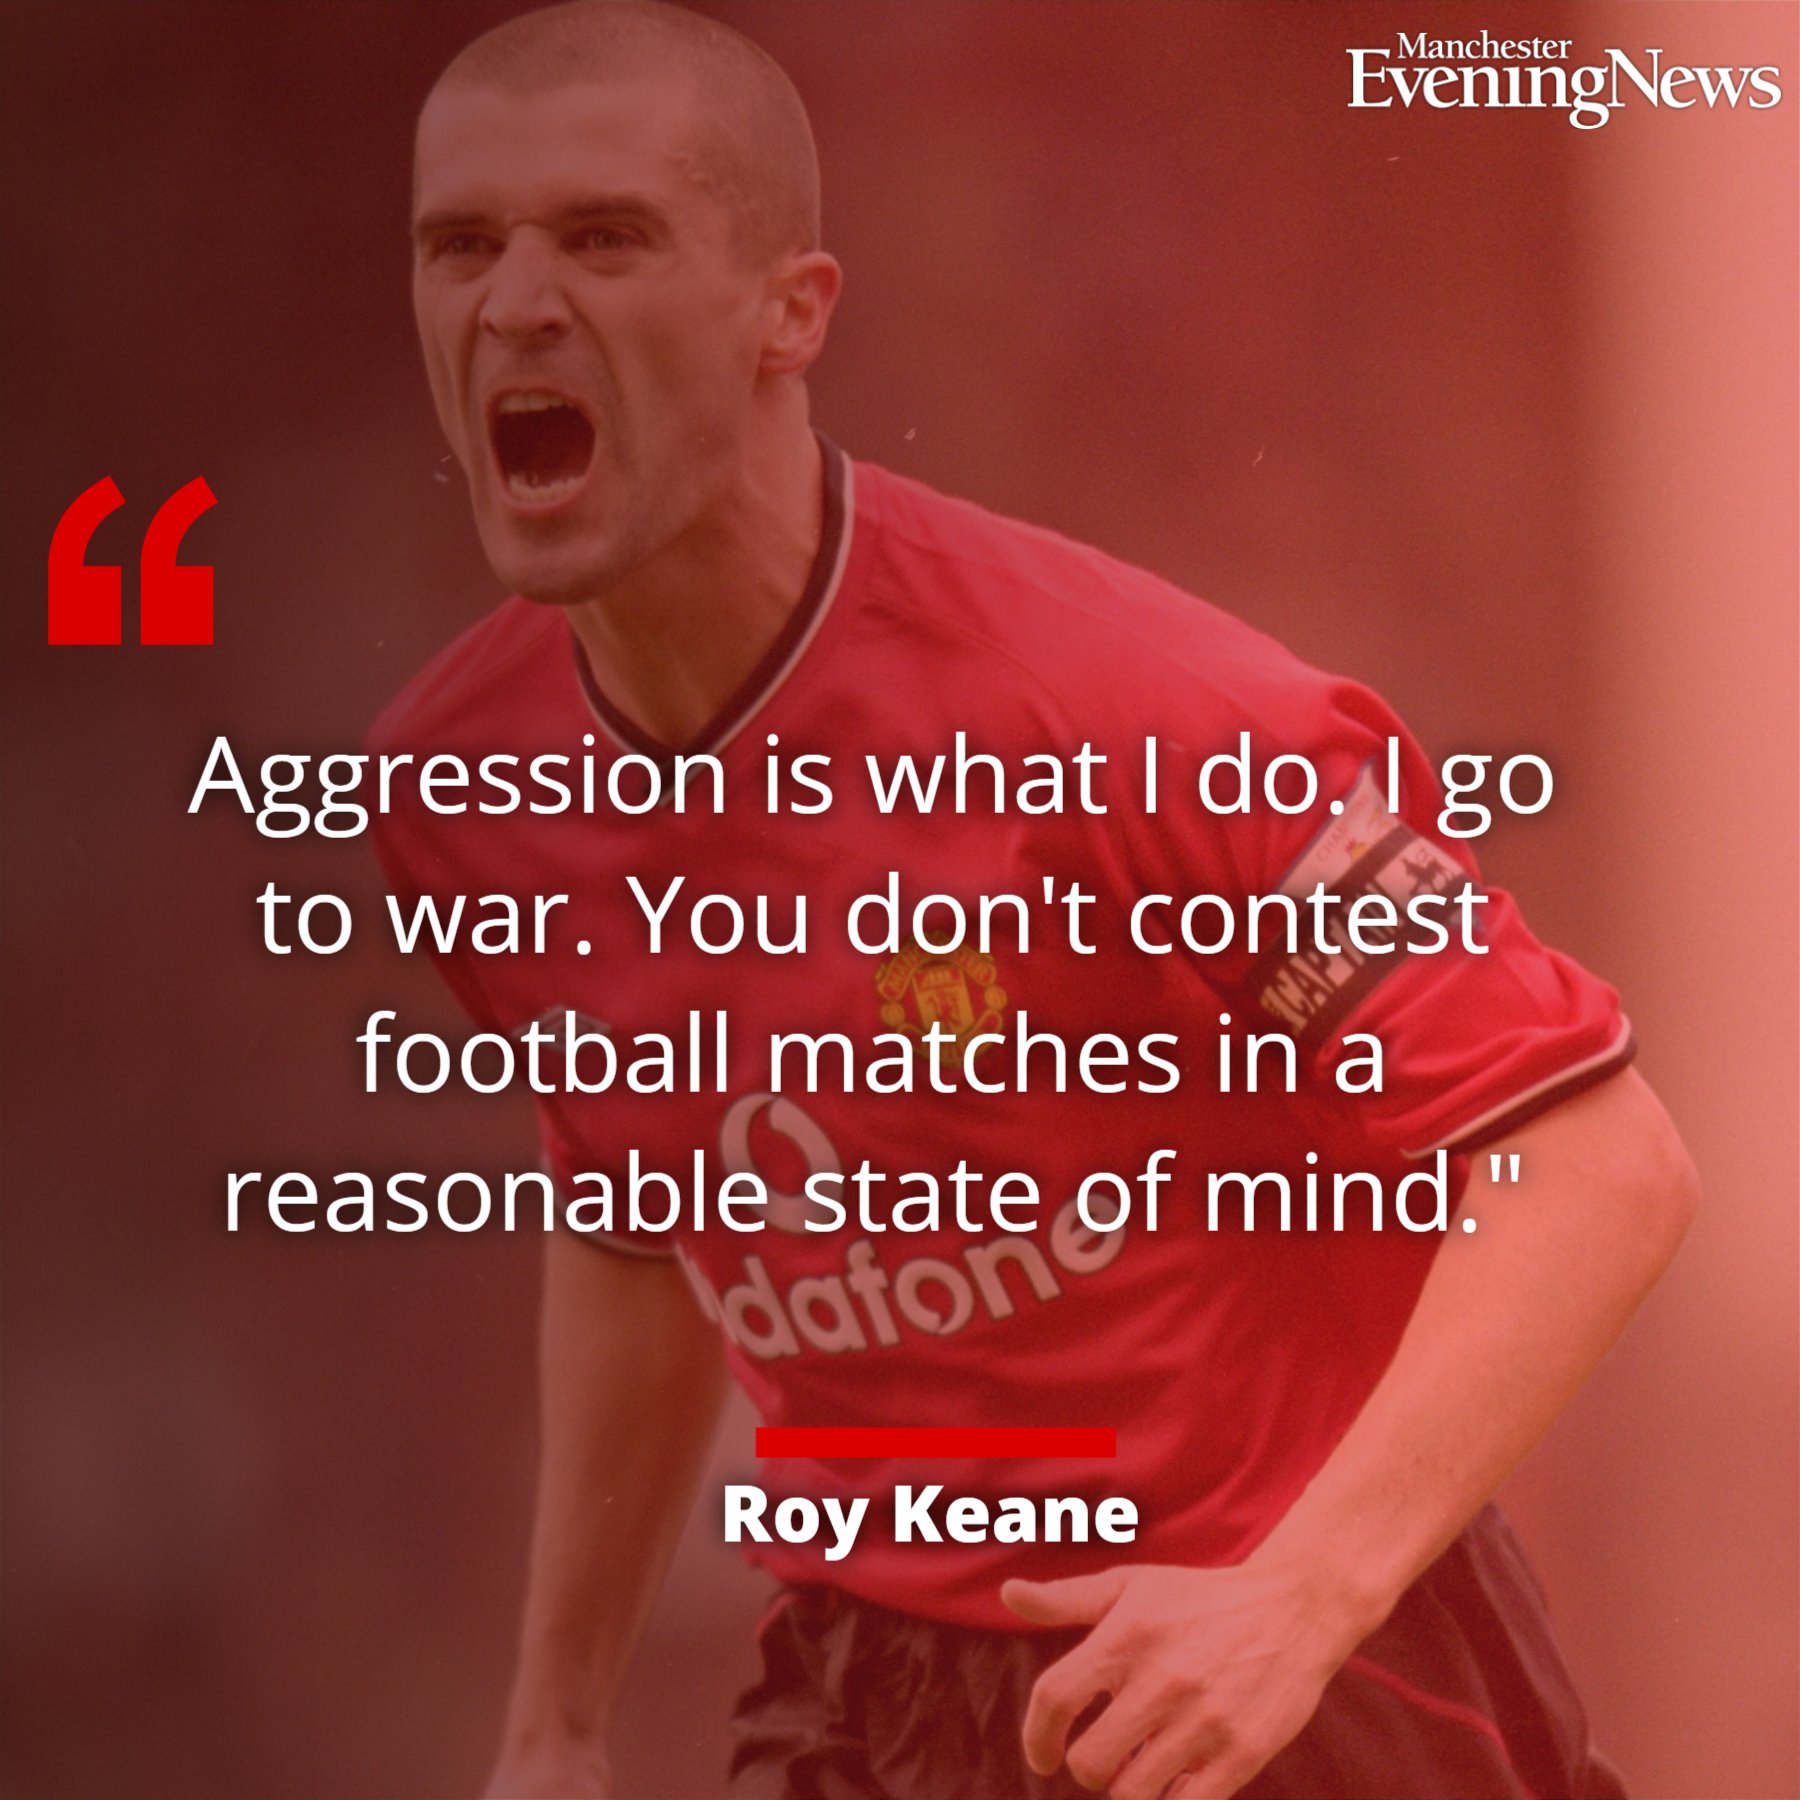  Happy 48th birthday to legend Roy Keane!

The greatest captain of all-time? 